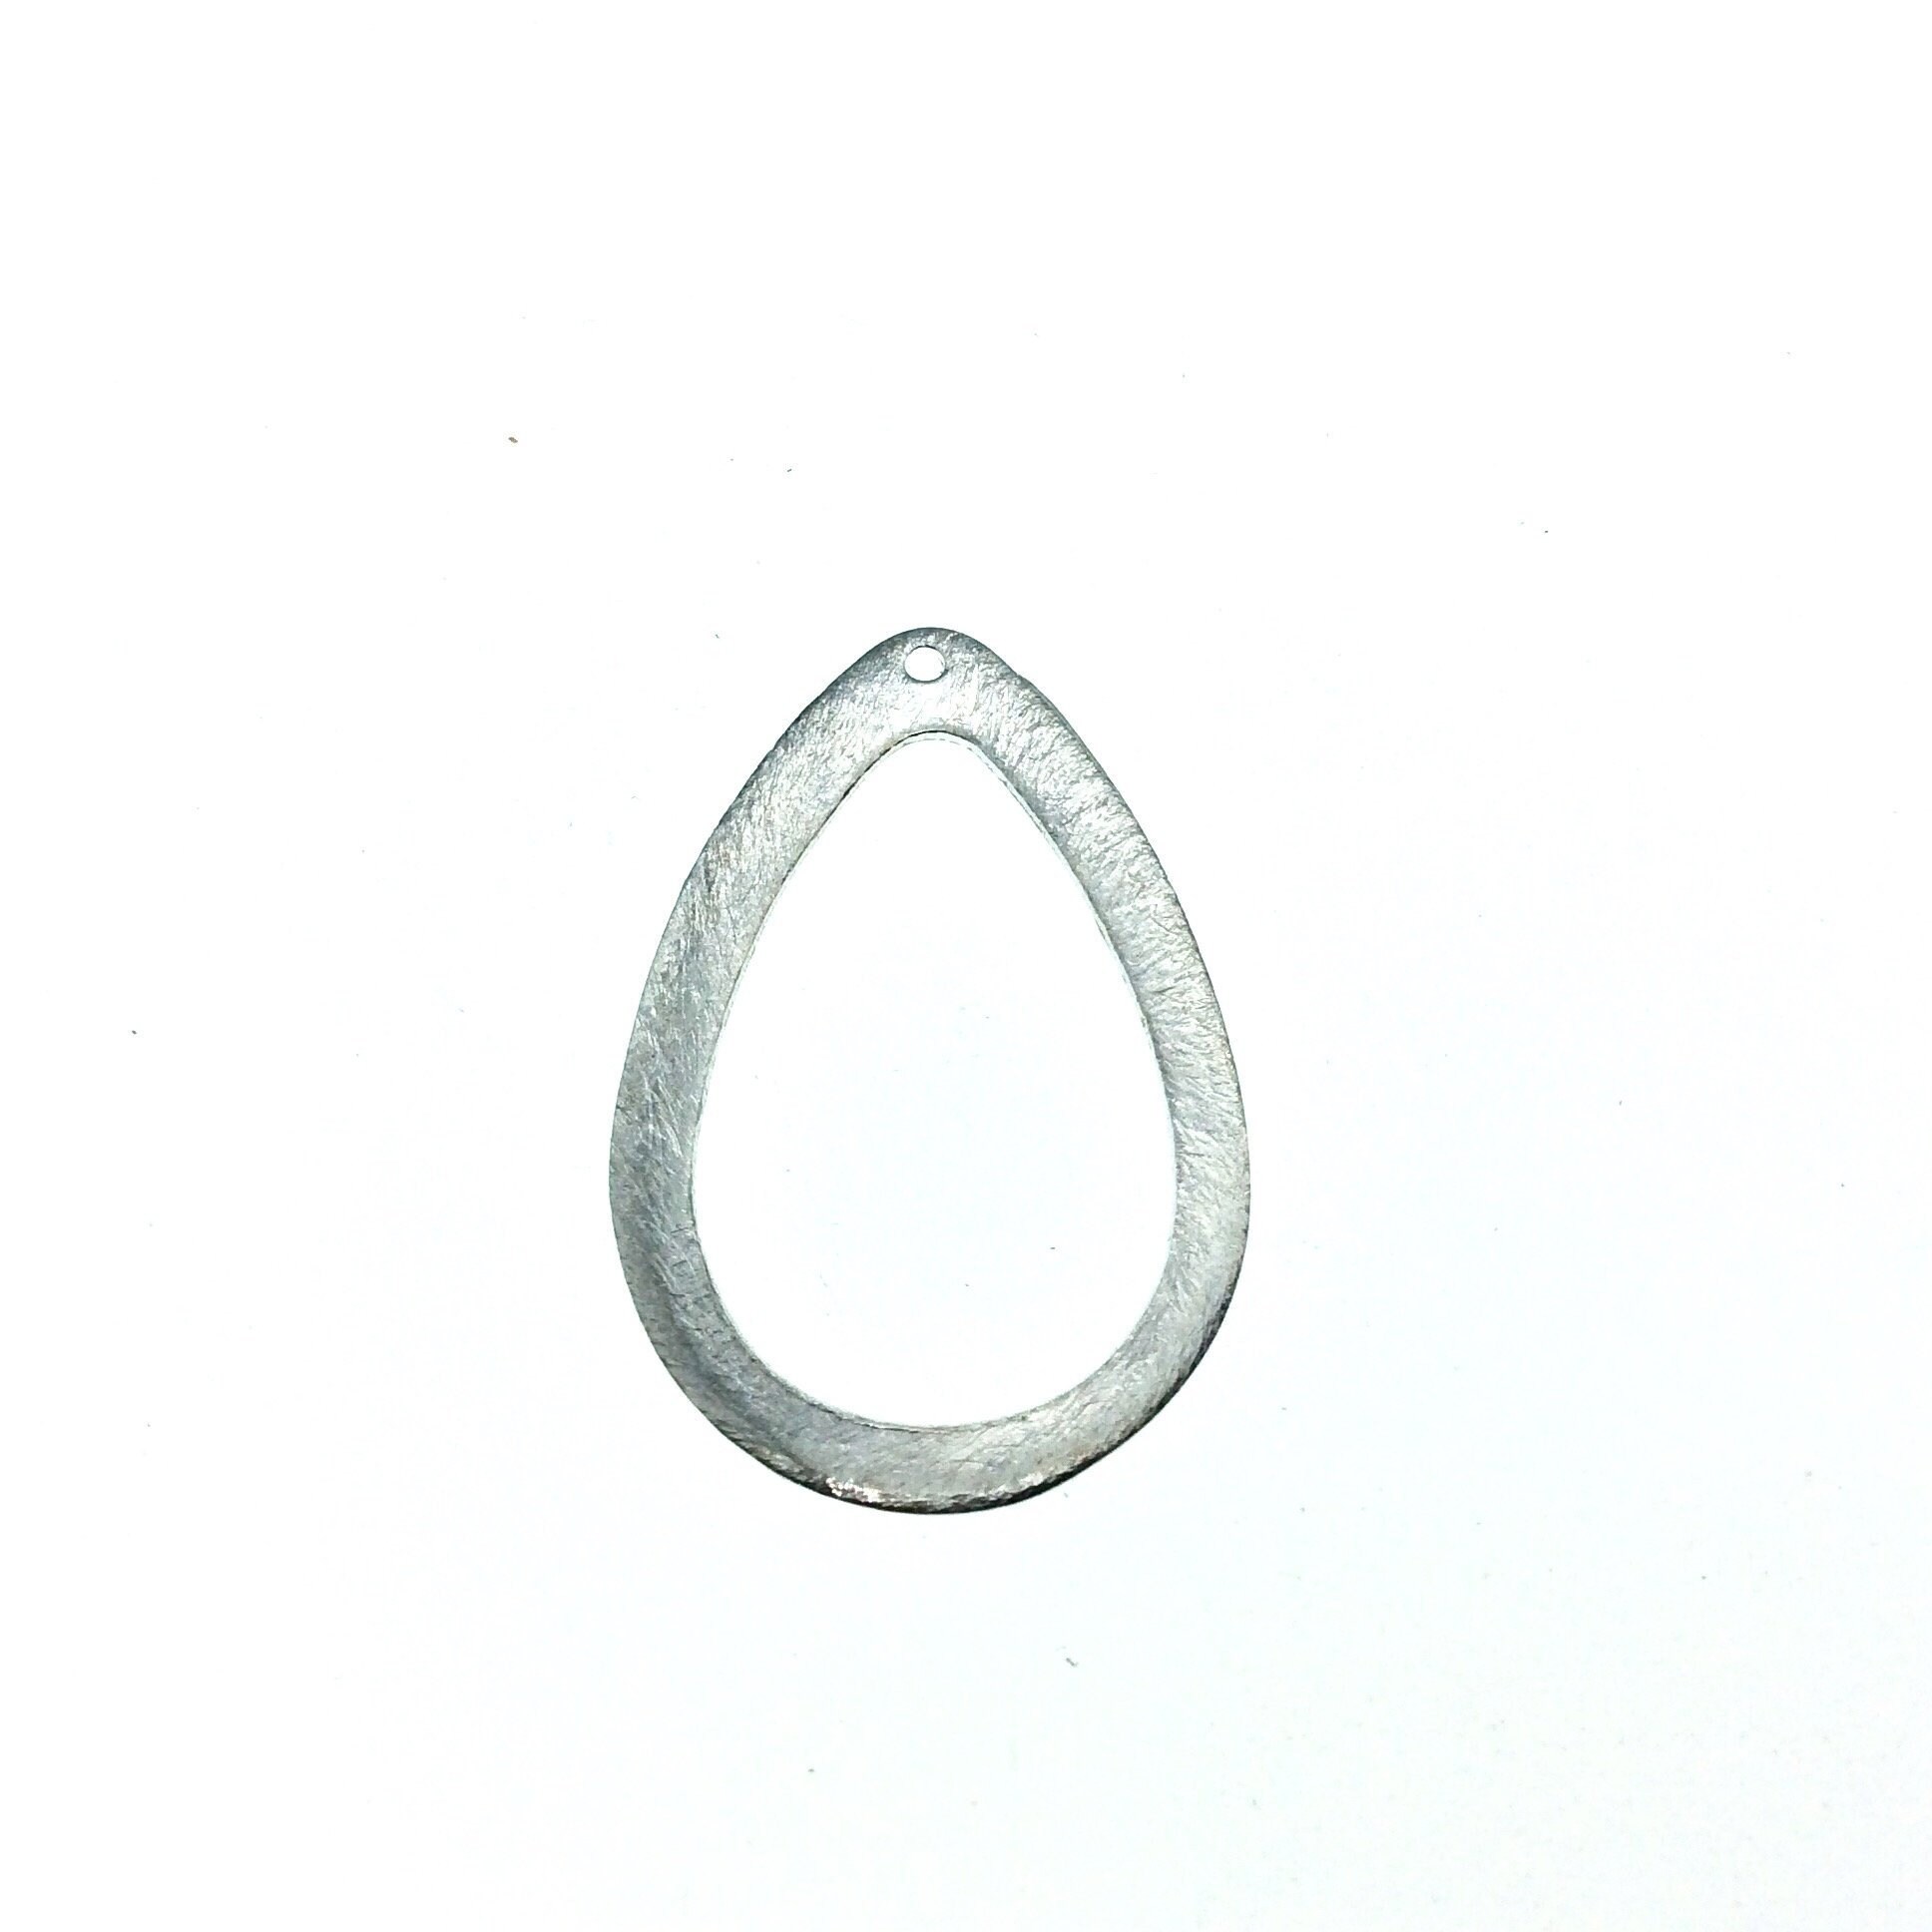 25mm x 37mm Silver Plated Copper Open Thick Teardrop Shaped Components with One Hole Sold in Packs of 10 Components